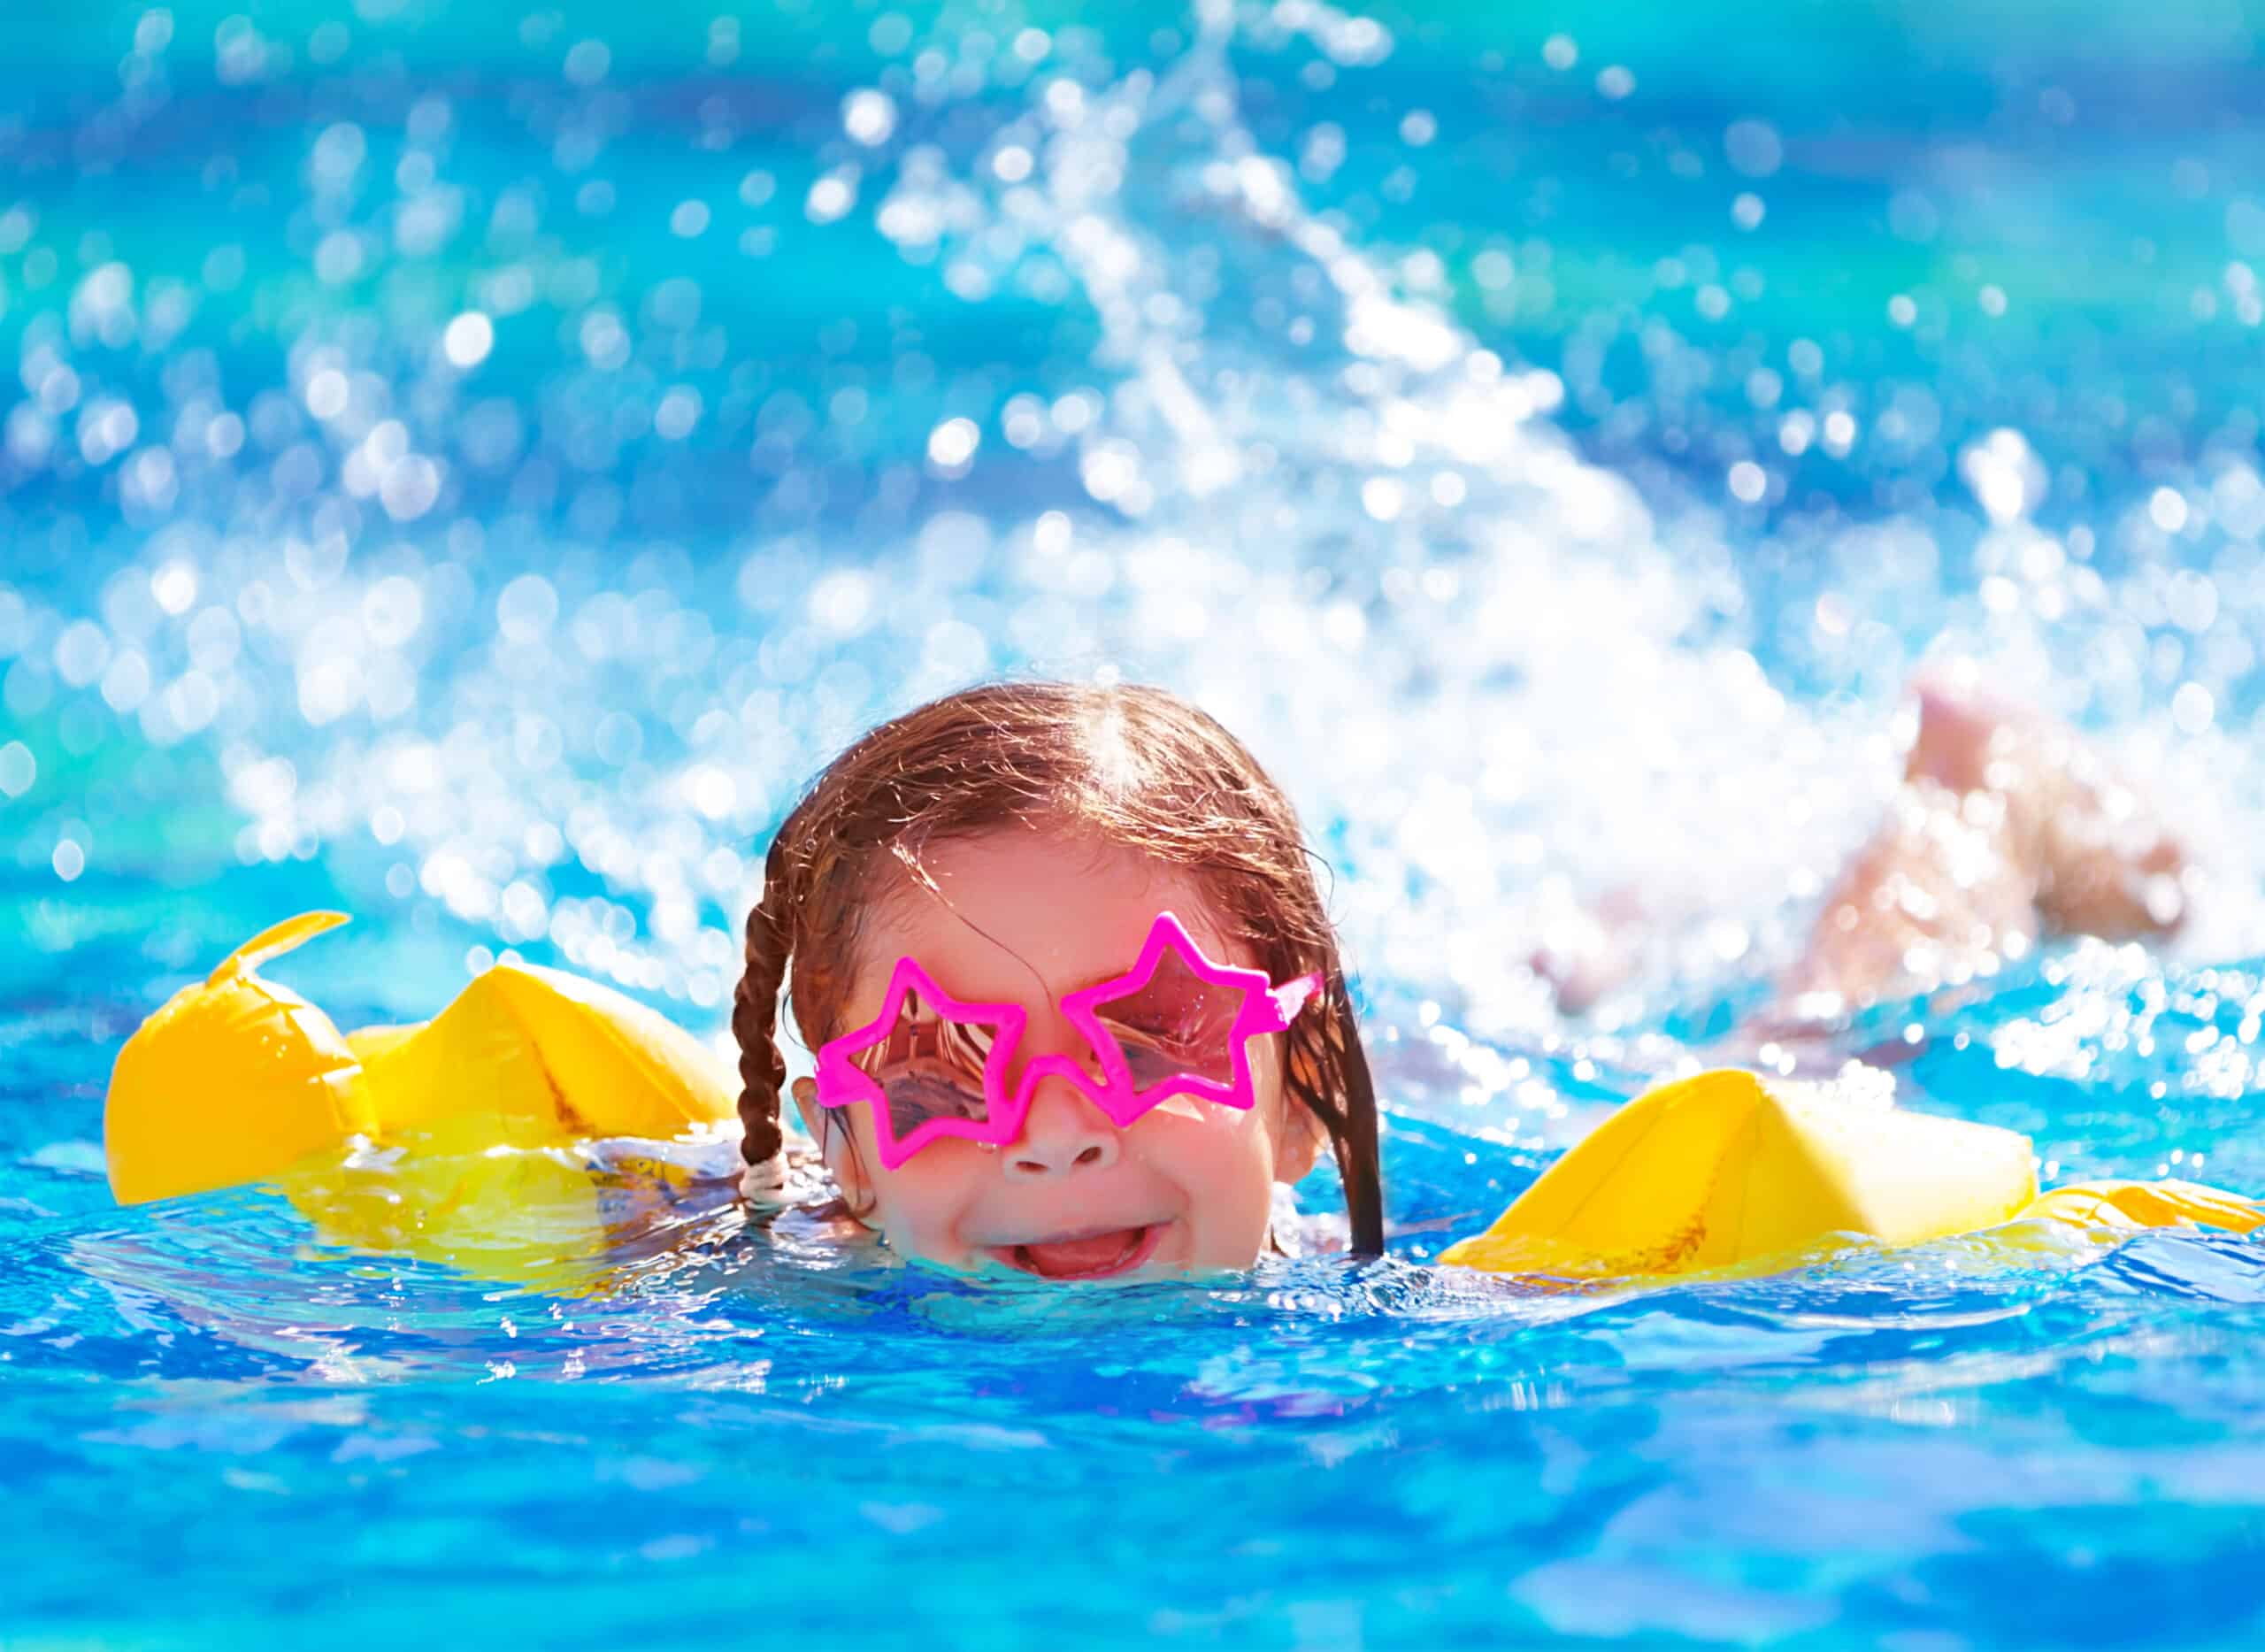 A girl wearing star-shaped glasses and water wings is swimming in a pool.